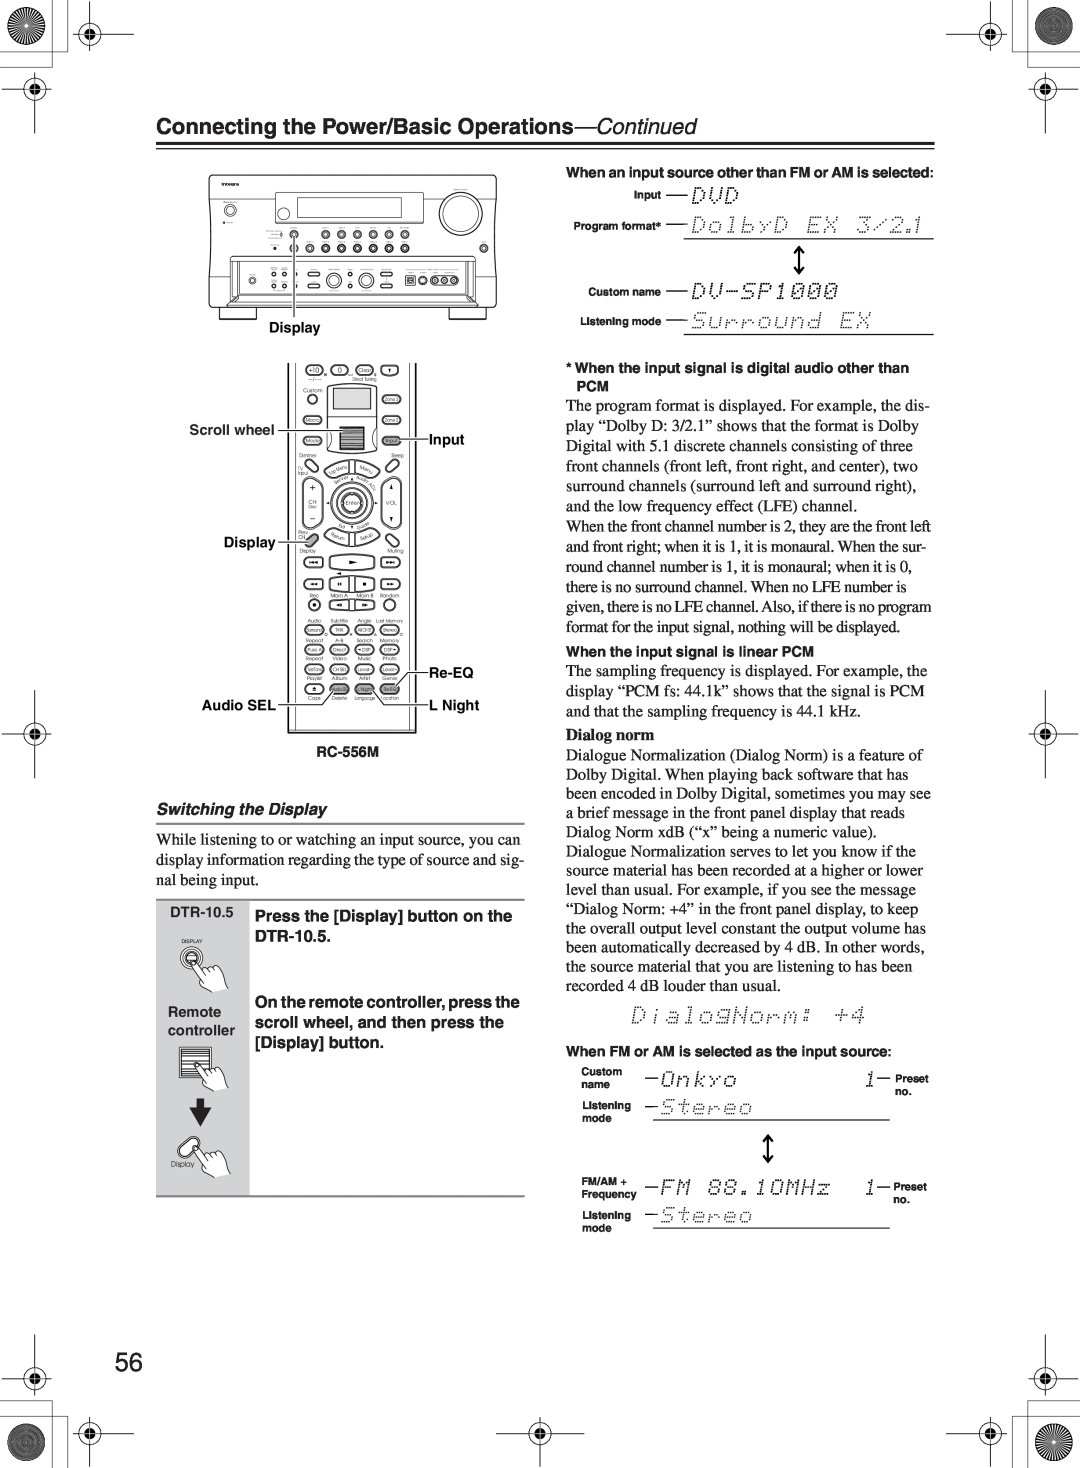 Integra DTR-10.5 instruction manual Switching the Display, Dialog norm, Connecting the Power/Basic Operations—Continued 